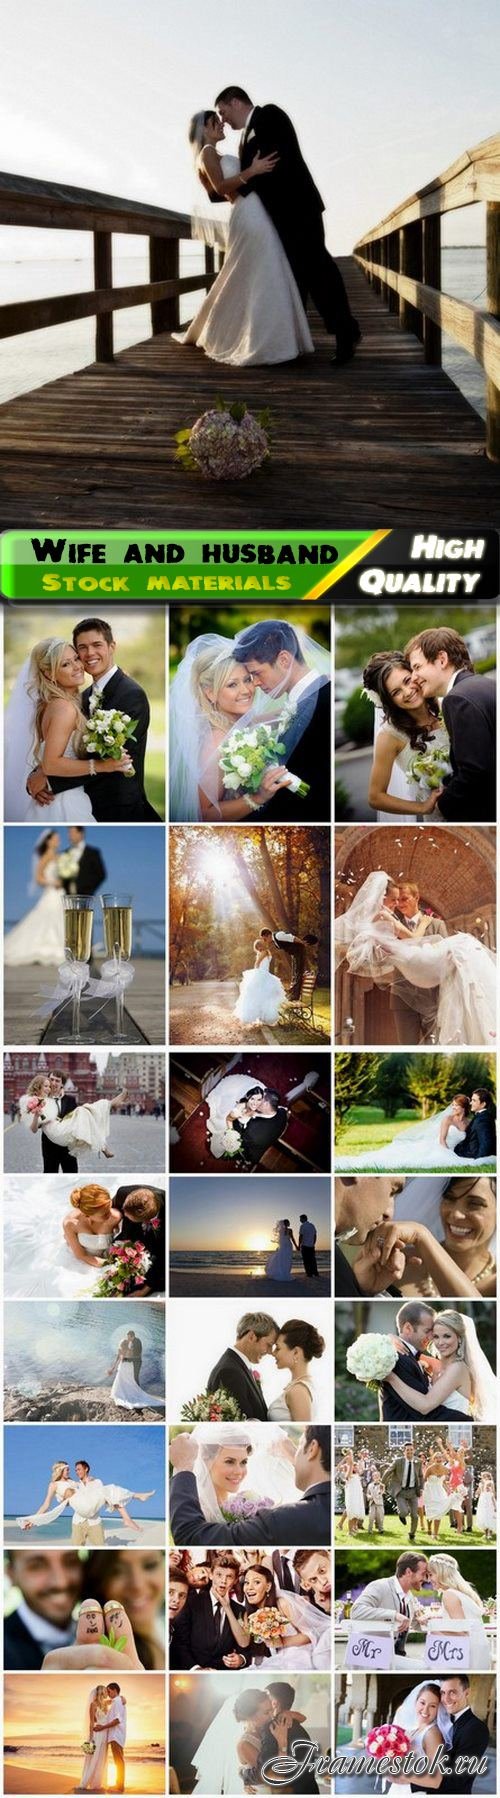 Wife and husband and wedding of bride and groom - 25 HQ Jpg